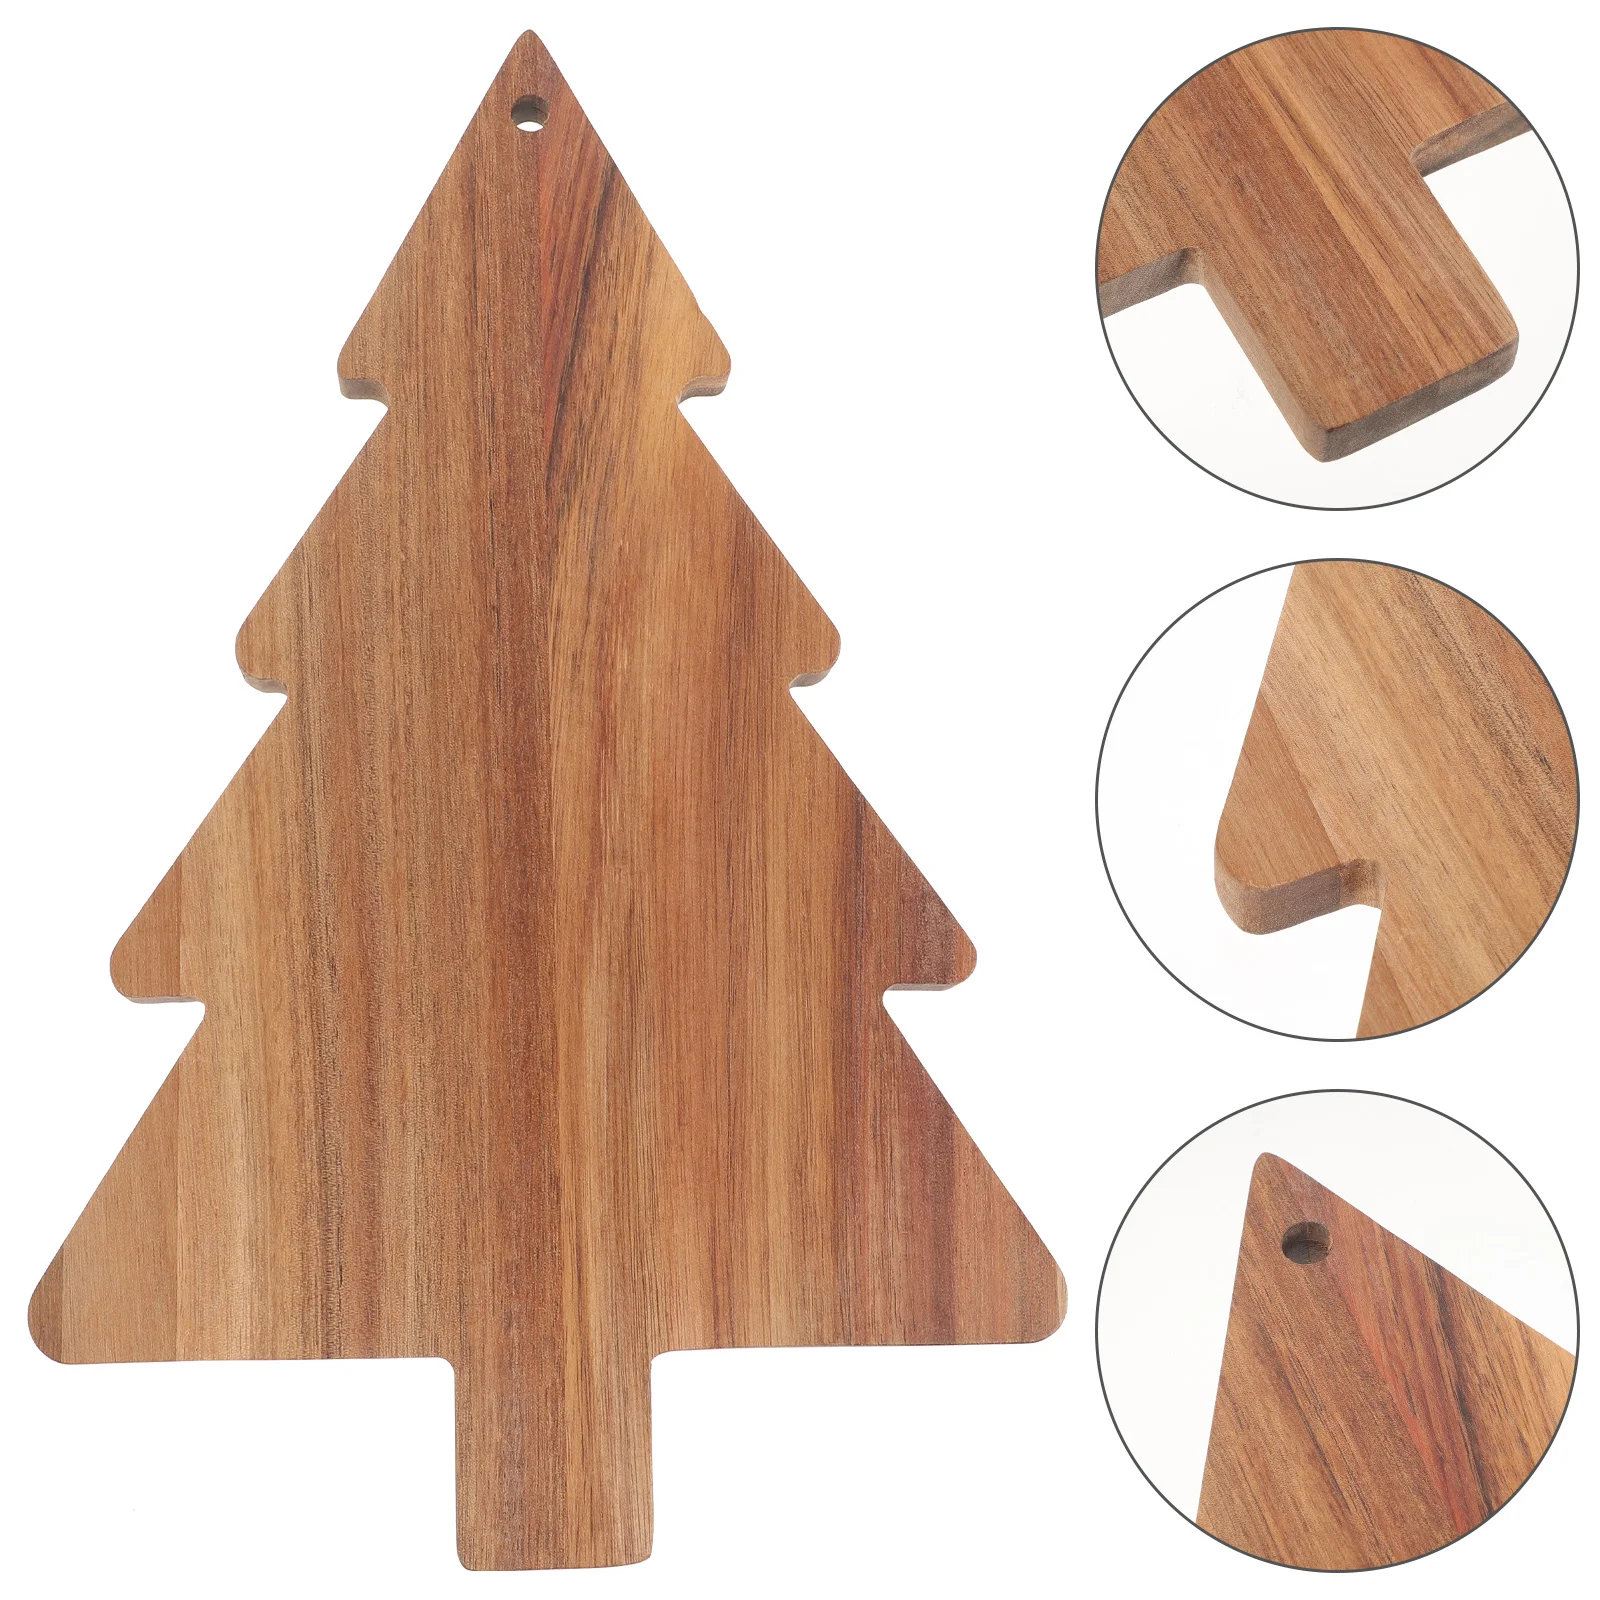 

Cutting Board Pizza Storage Fruit Tray Dessert Plate Cute Boards Wooden Charcuterie Christmas Tree Shaped Butter Chopping